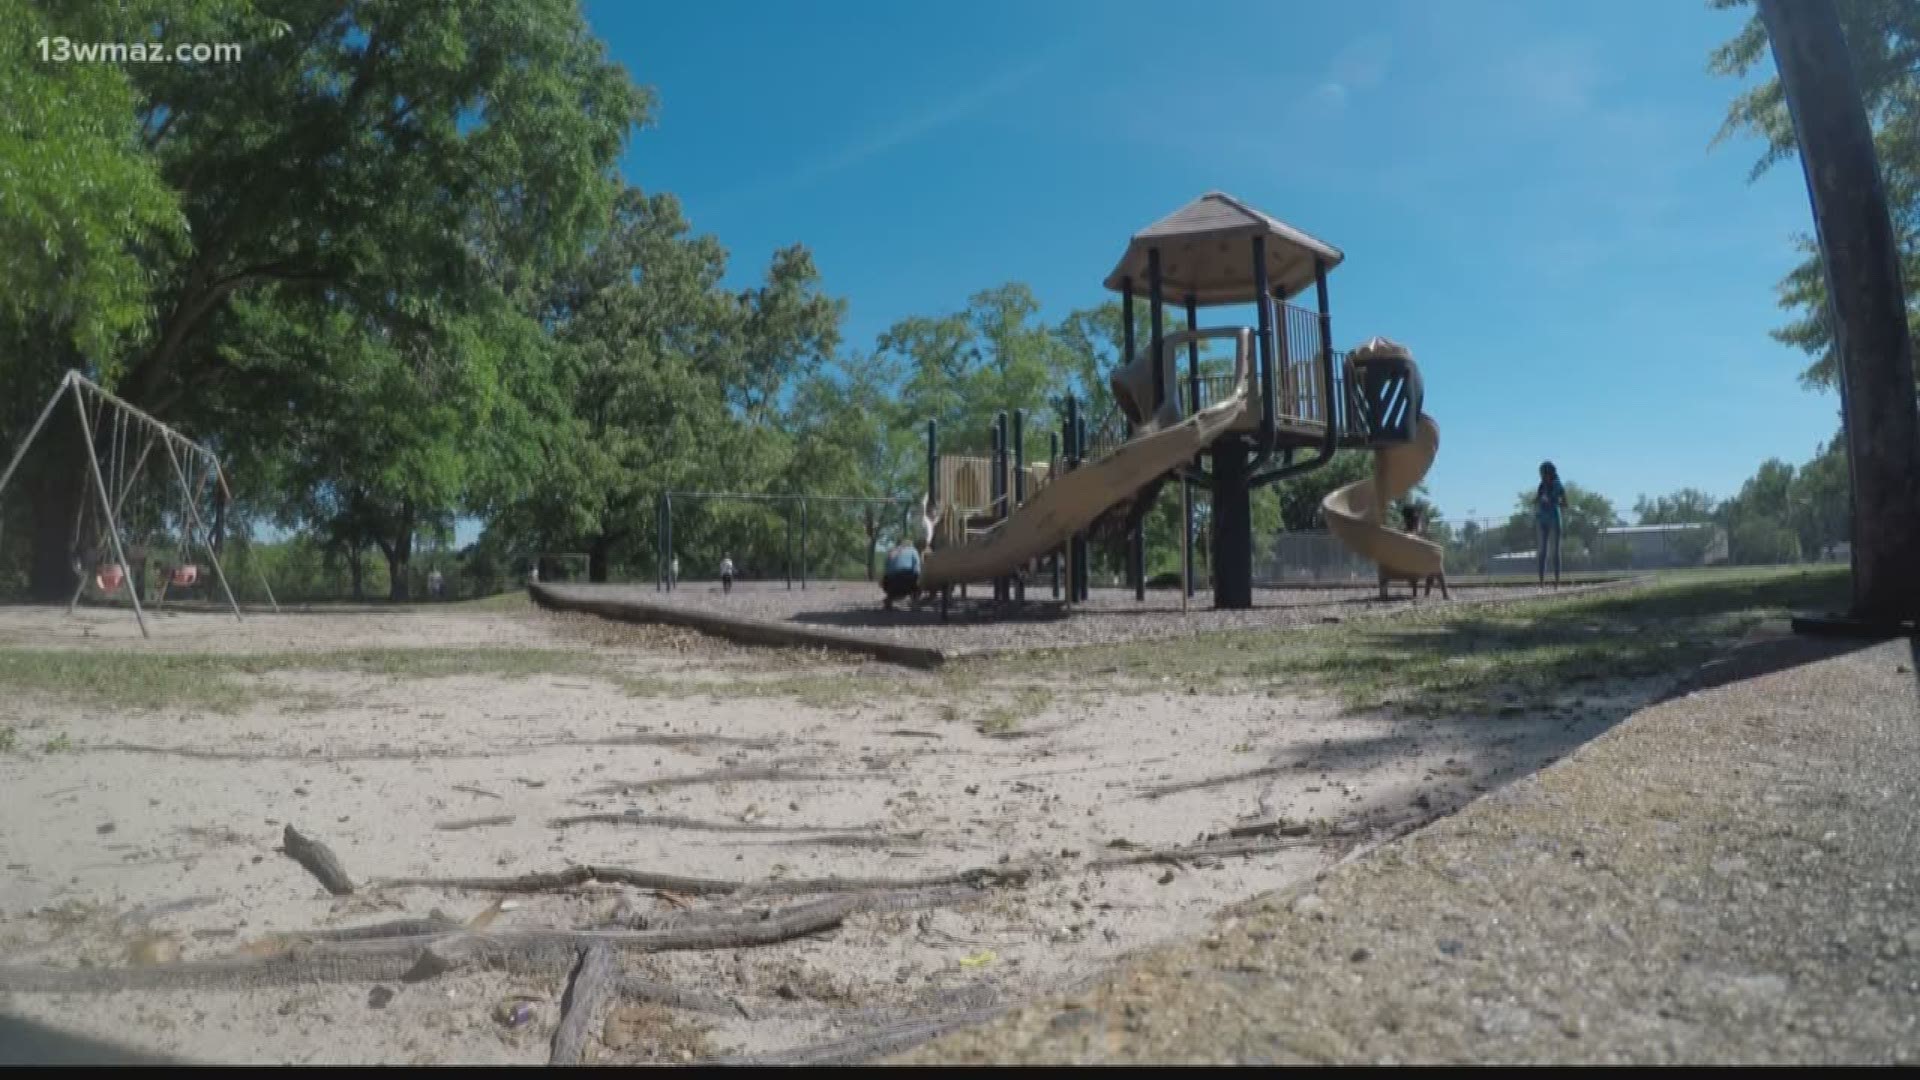 Bibb County commissioners approved more than $1.4 million of funding for a third round of renovations to Freedom Park. The money will help build two new basketball courts, playground equipment, and an additional pavilion.